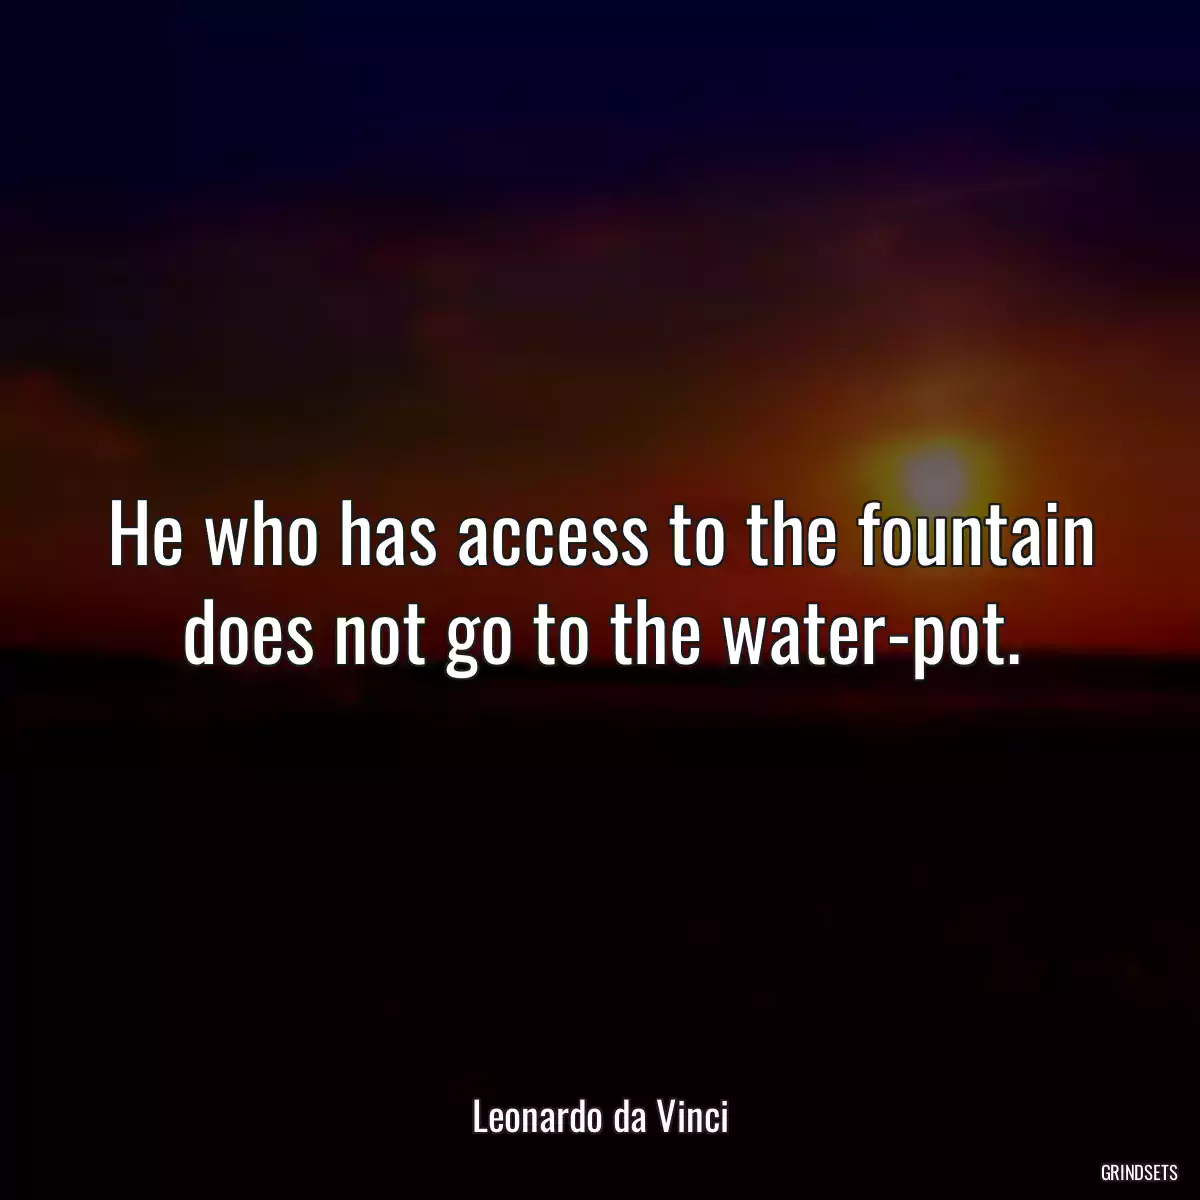 He who has access to the fountain does not go to the water-pot.